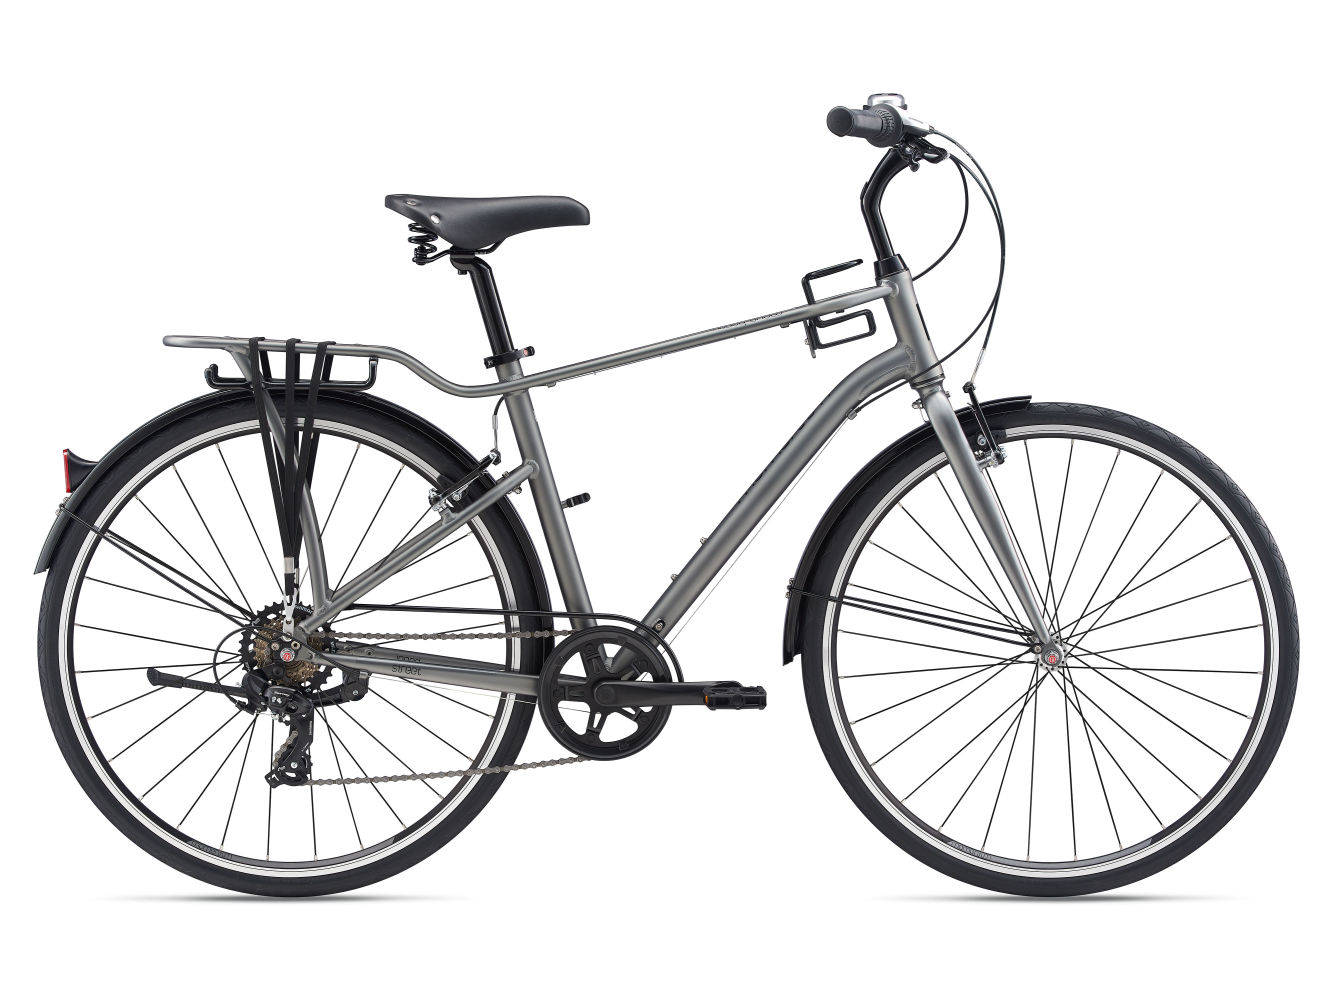 This image showcases an adult silver hybrid bike for the Glenwood Hot Springs Ride Share program. Provided by Hanging Lake Adventure Co-op and Glenwood Canyon Bikes.